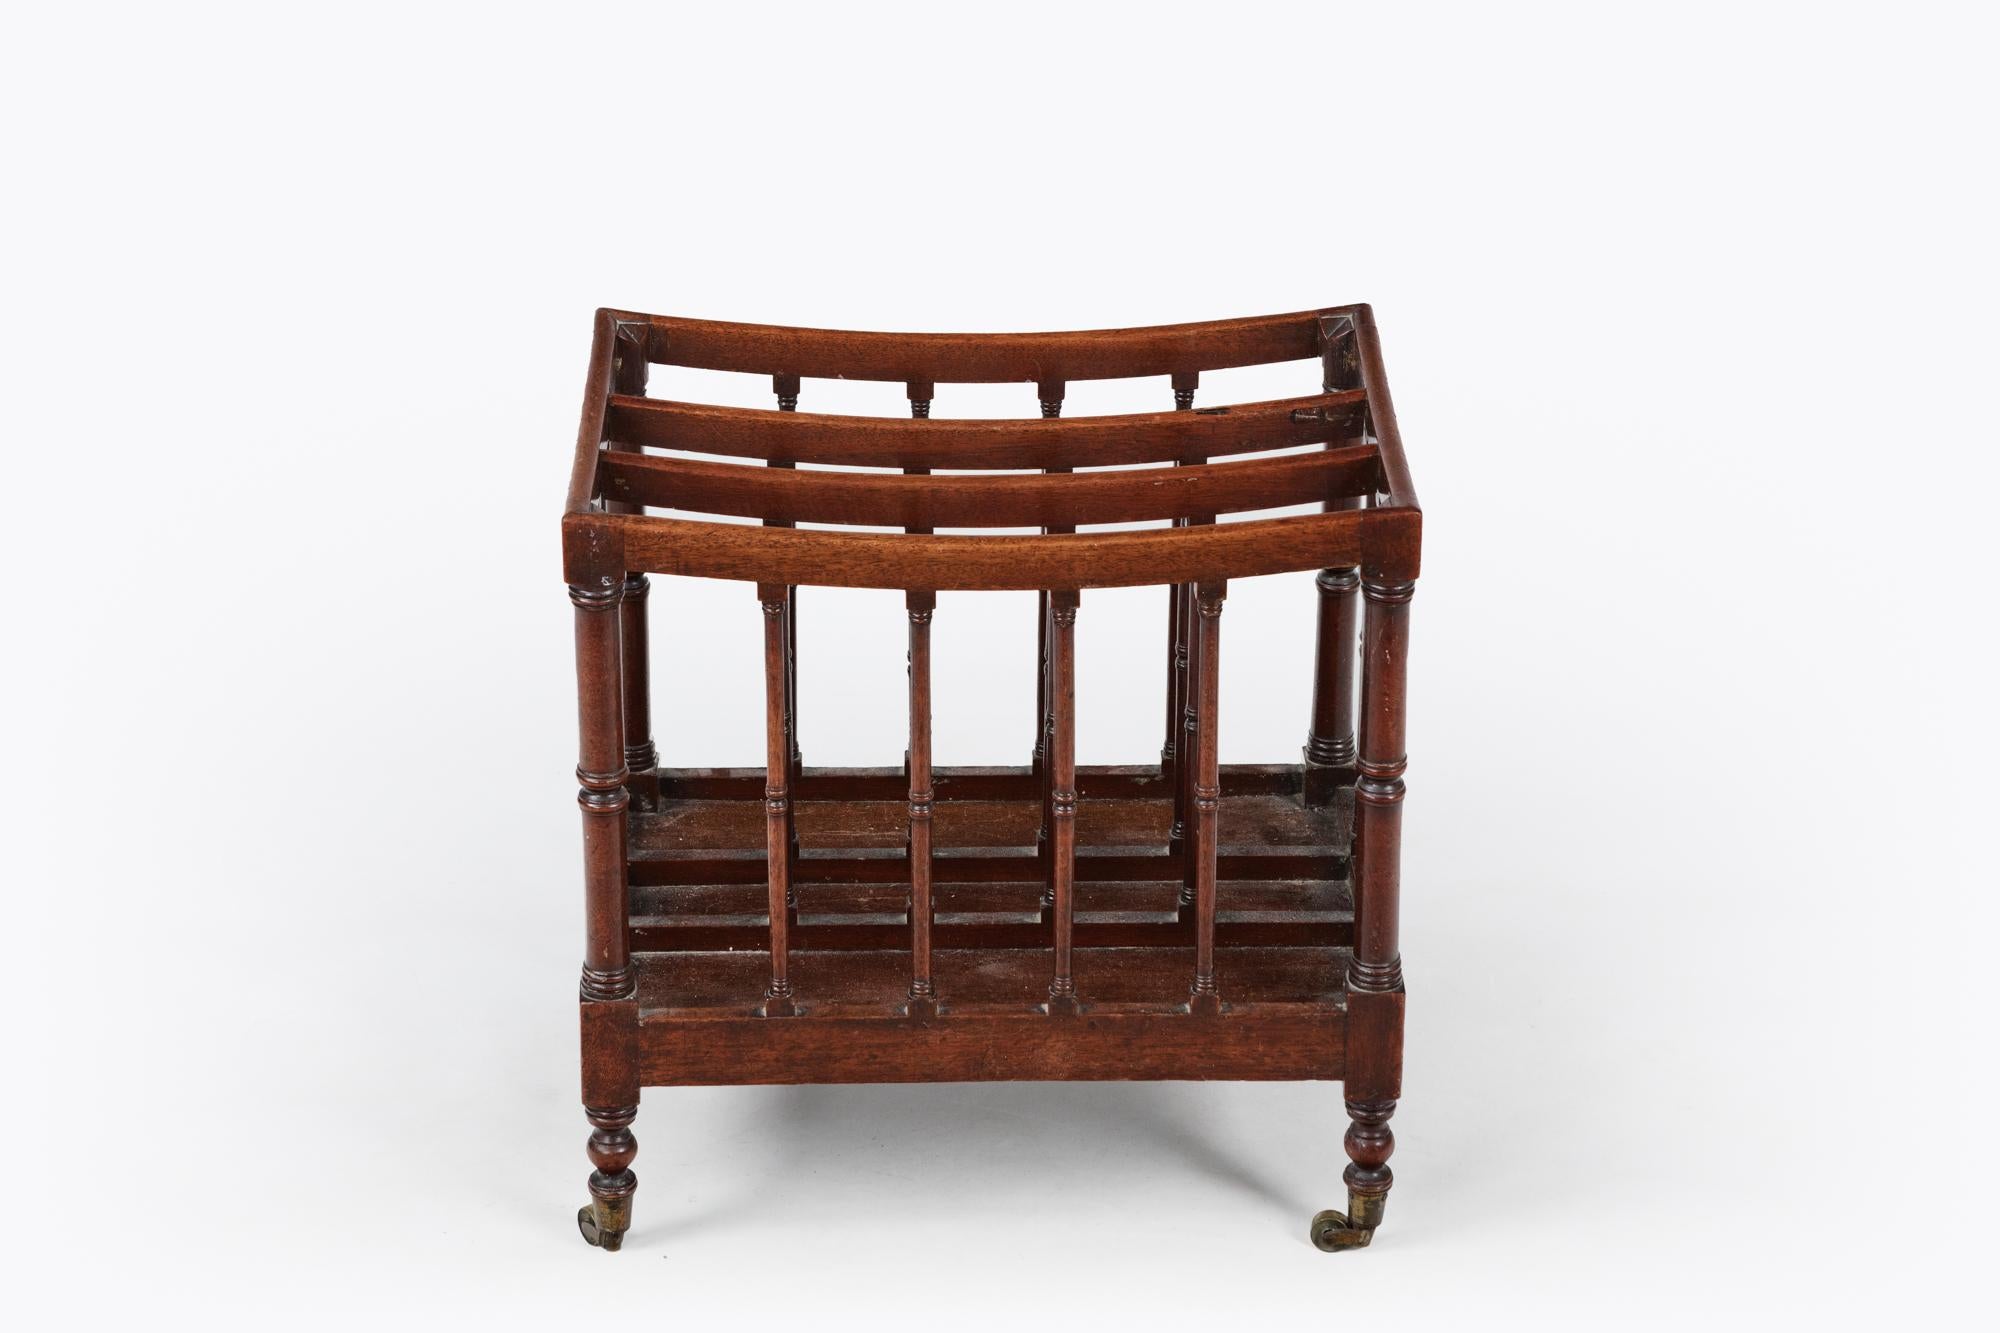 Early 19th century mahogany Canterbury, three slatted divisions over a single beaded drawer and raised on slender turned legs and brass castors, circa 1820.